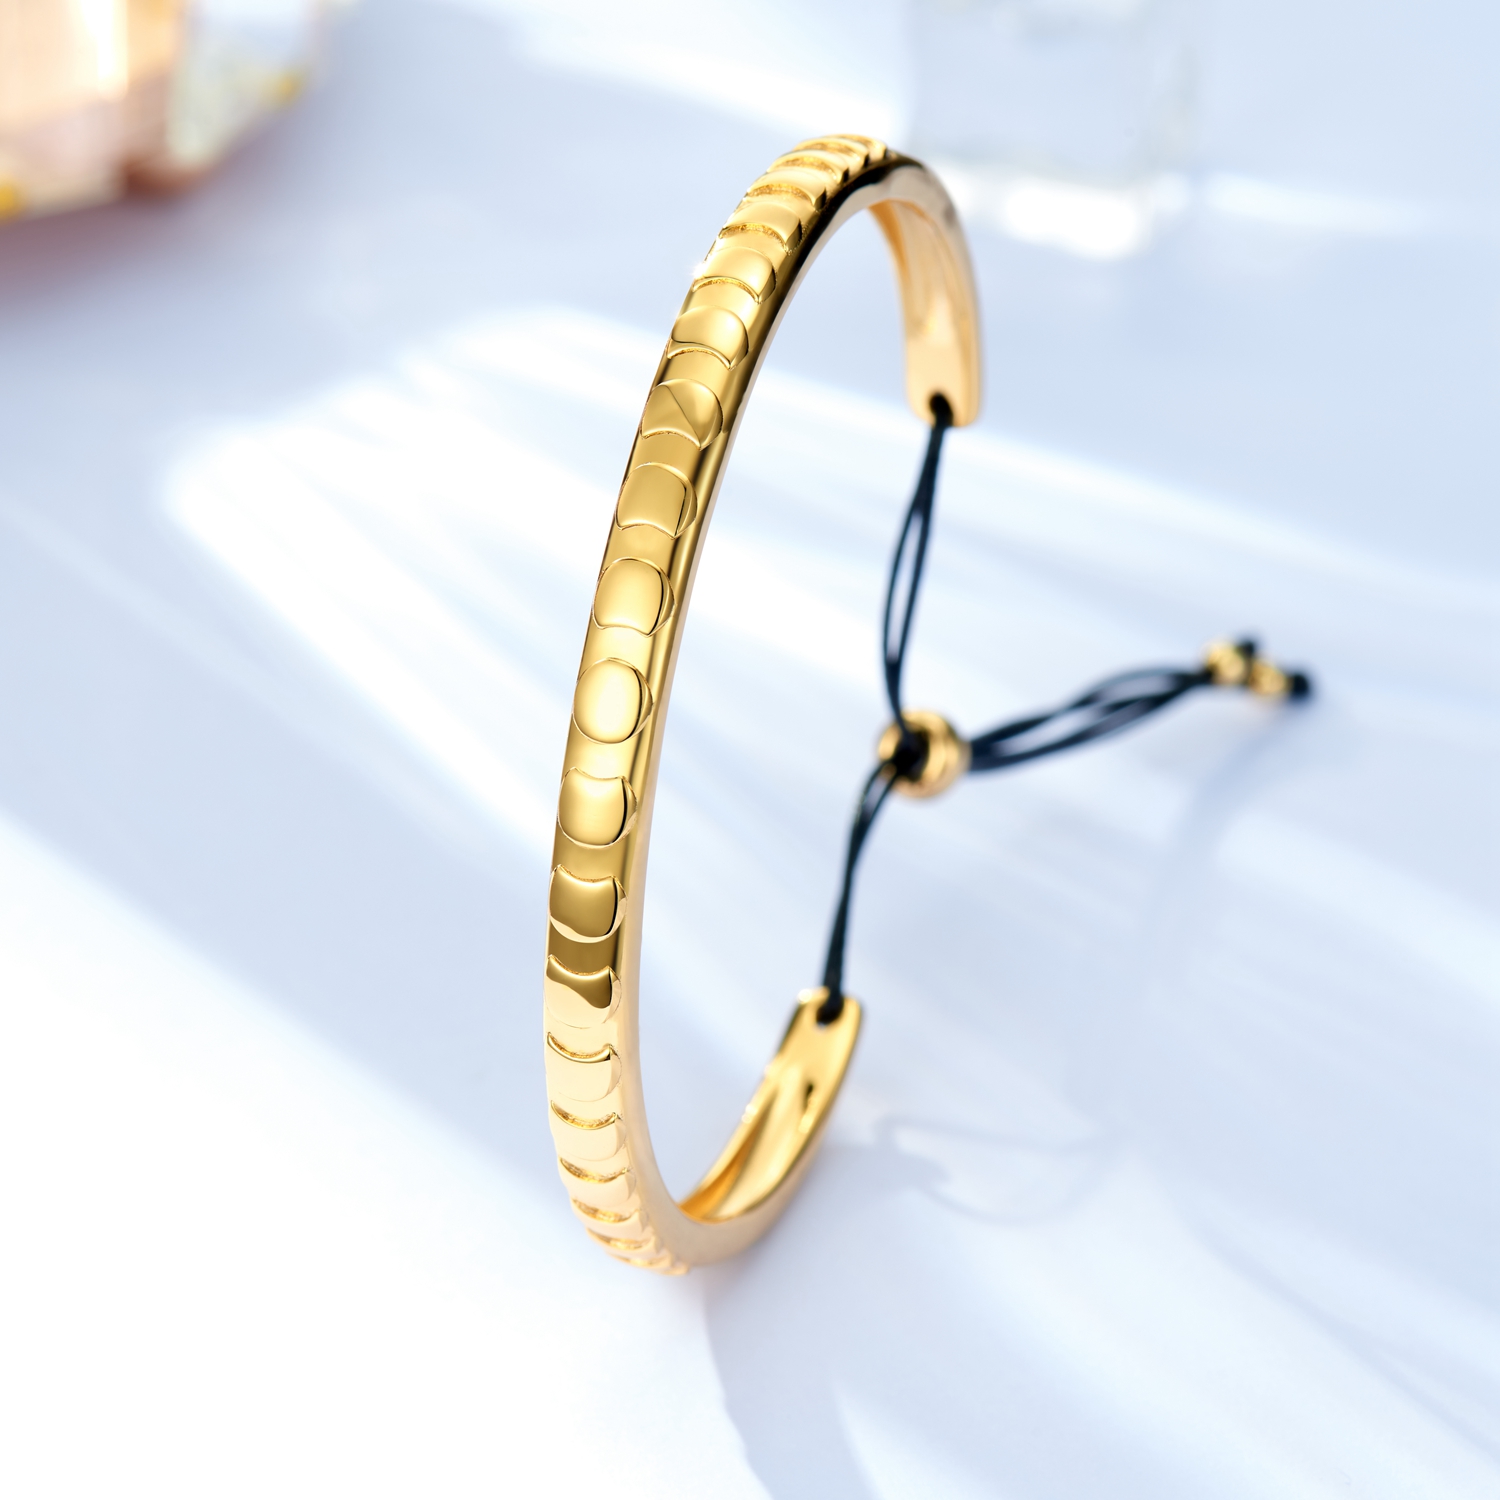 Buy Real 18k Gold Filled Cuff Bangles Open Wide Bangle,dubai Bangle Bracelet,  1 Pc Bangle Bracelet Online in India - Etsy